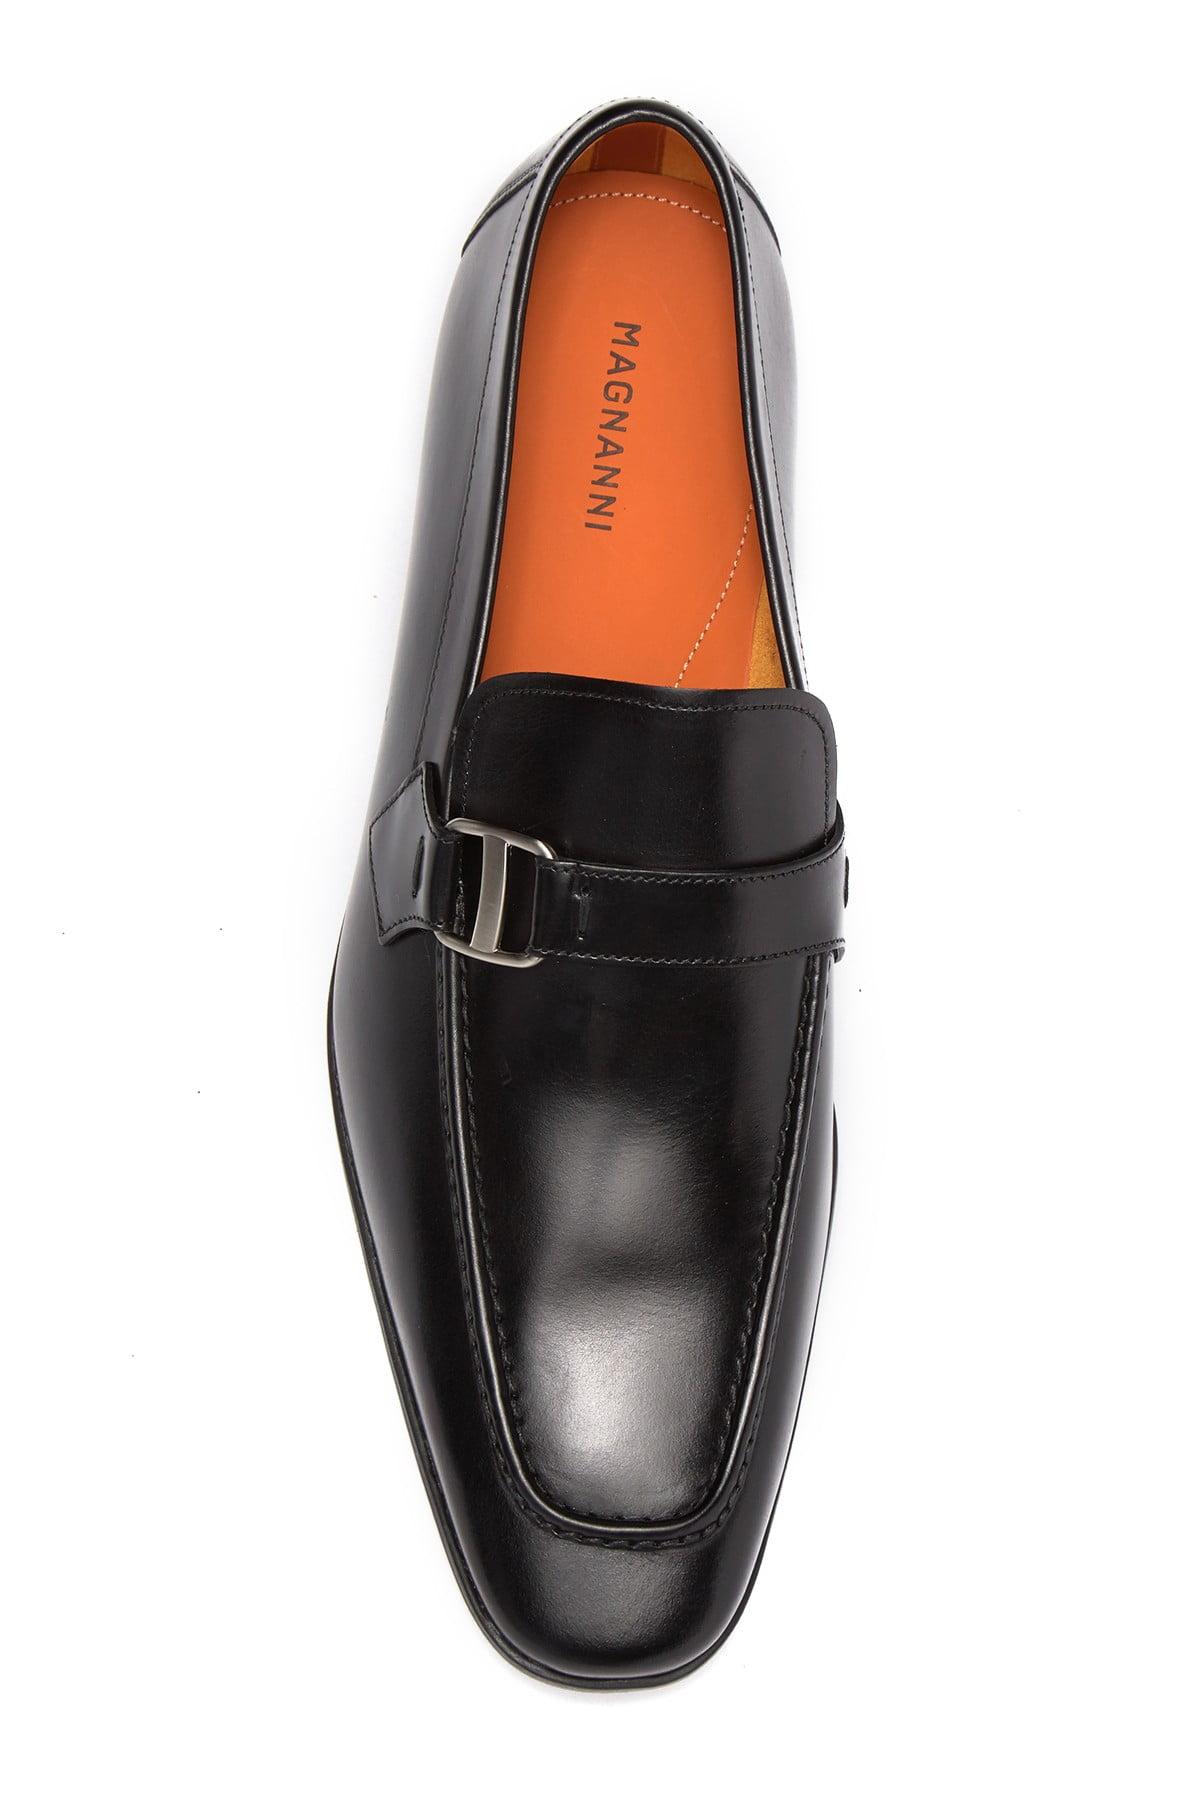 Magnanni Tonic Leather Buckle Loafer in 